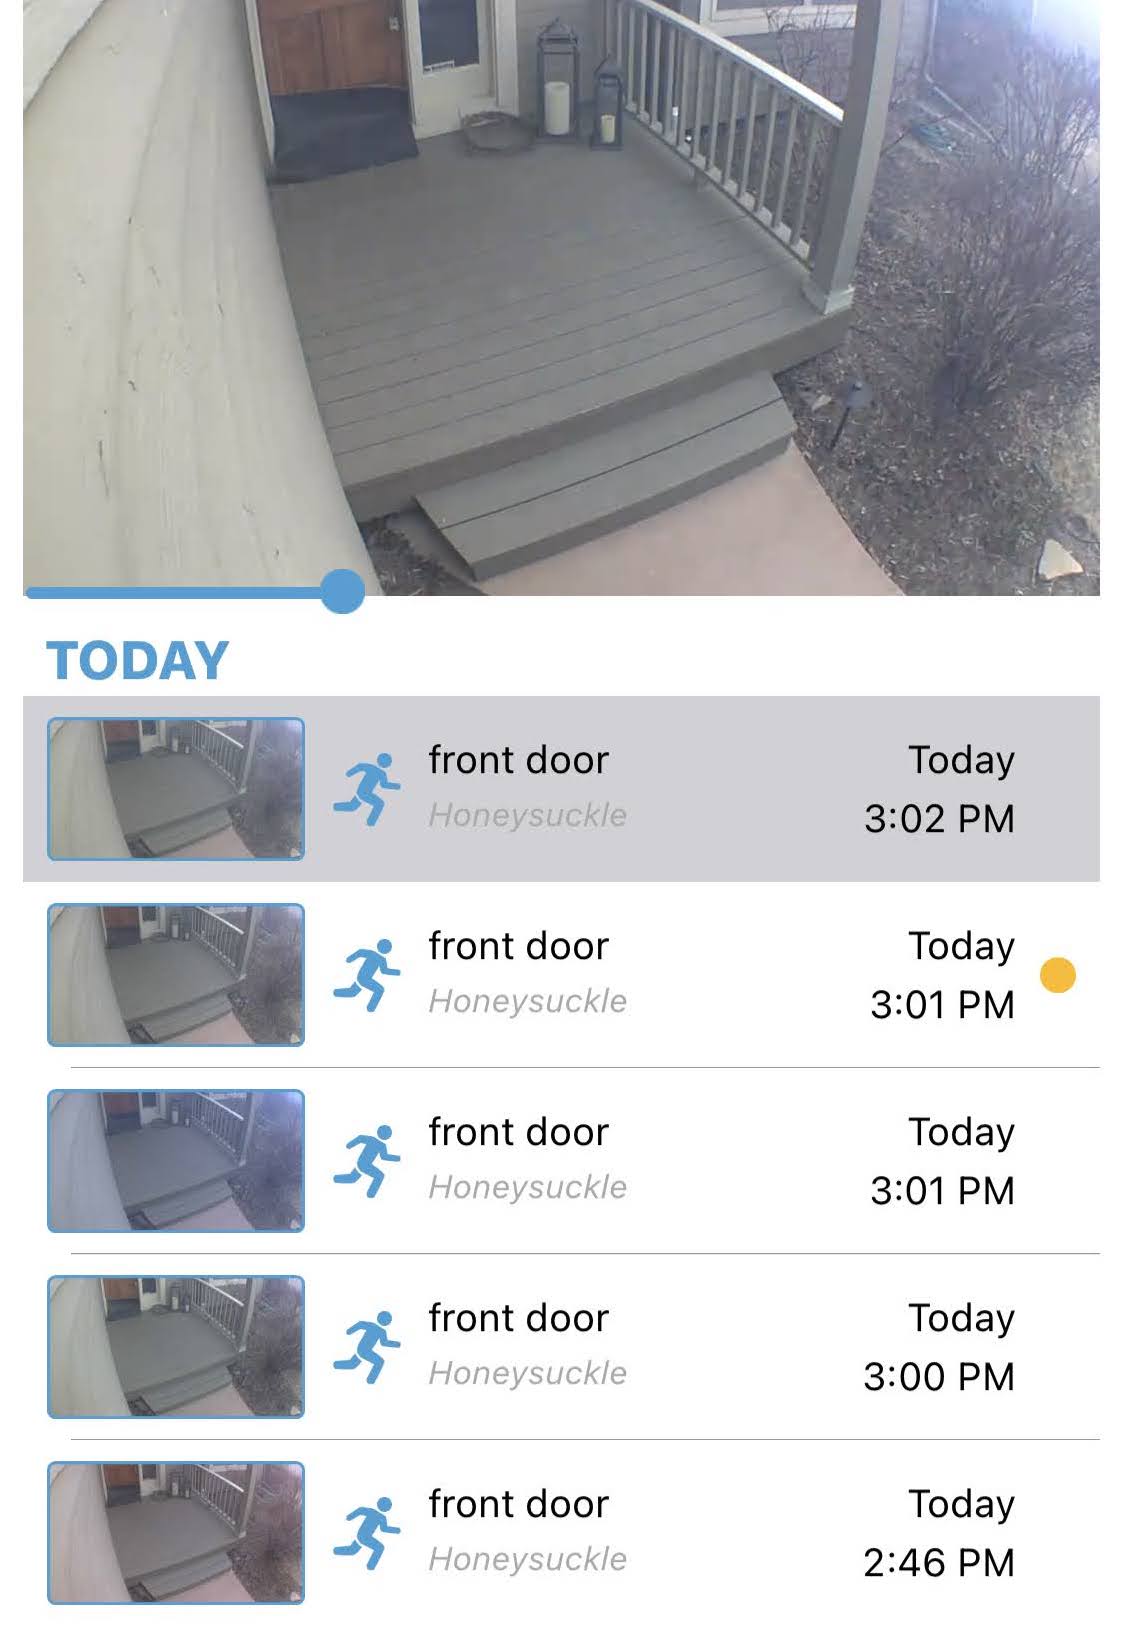 Motion notifications showing images of front porch